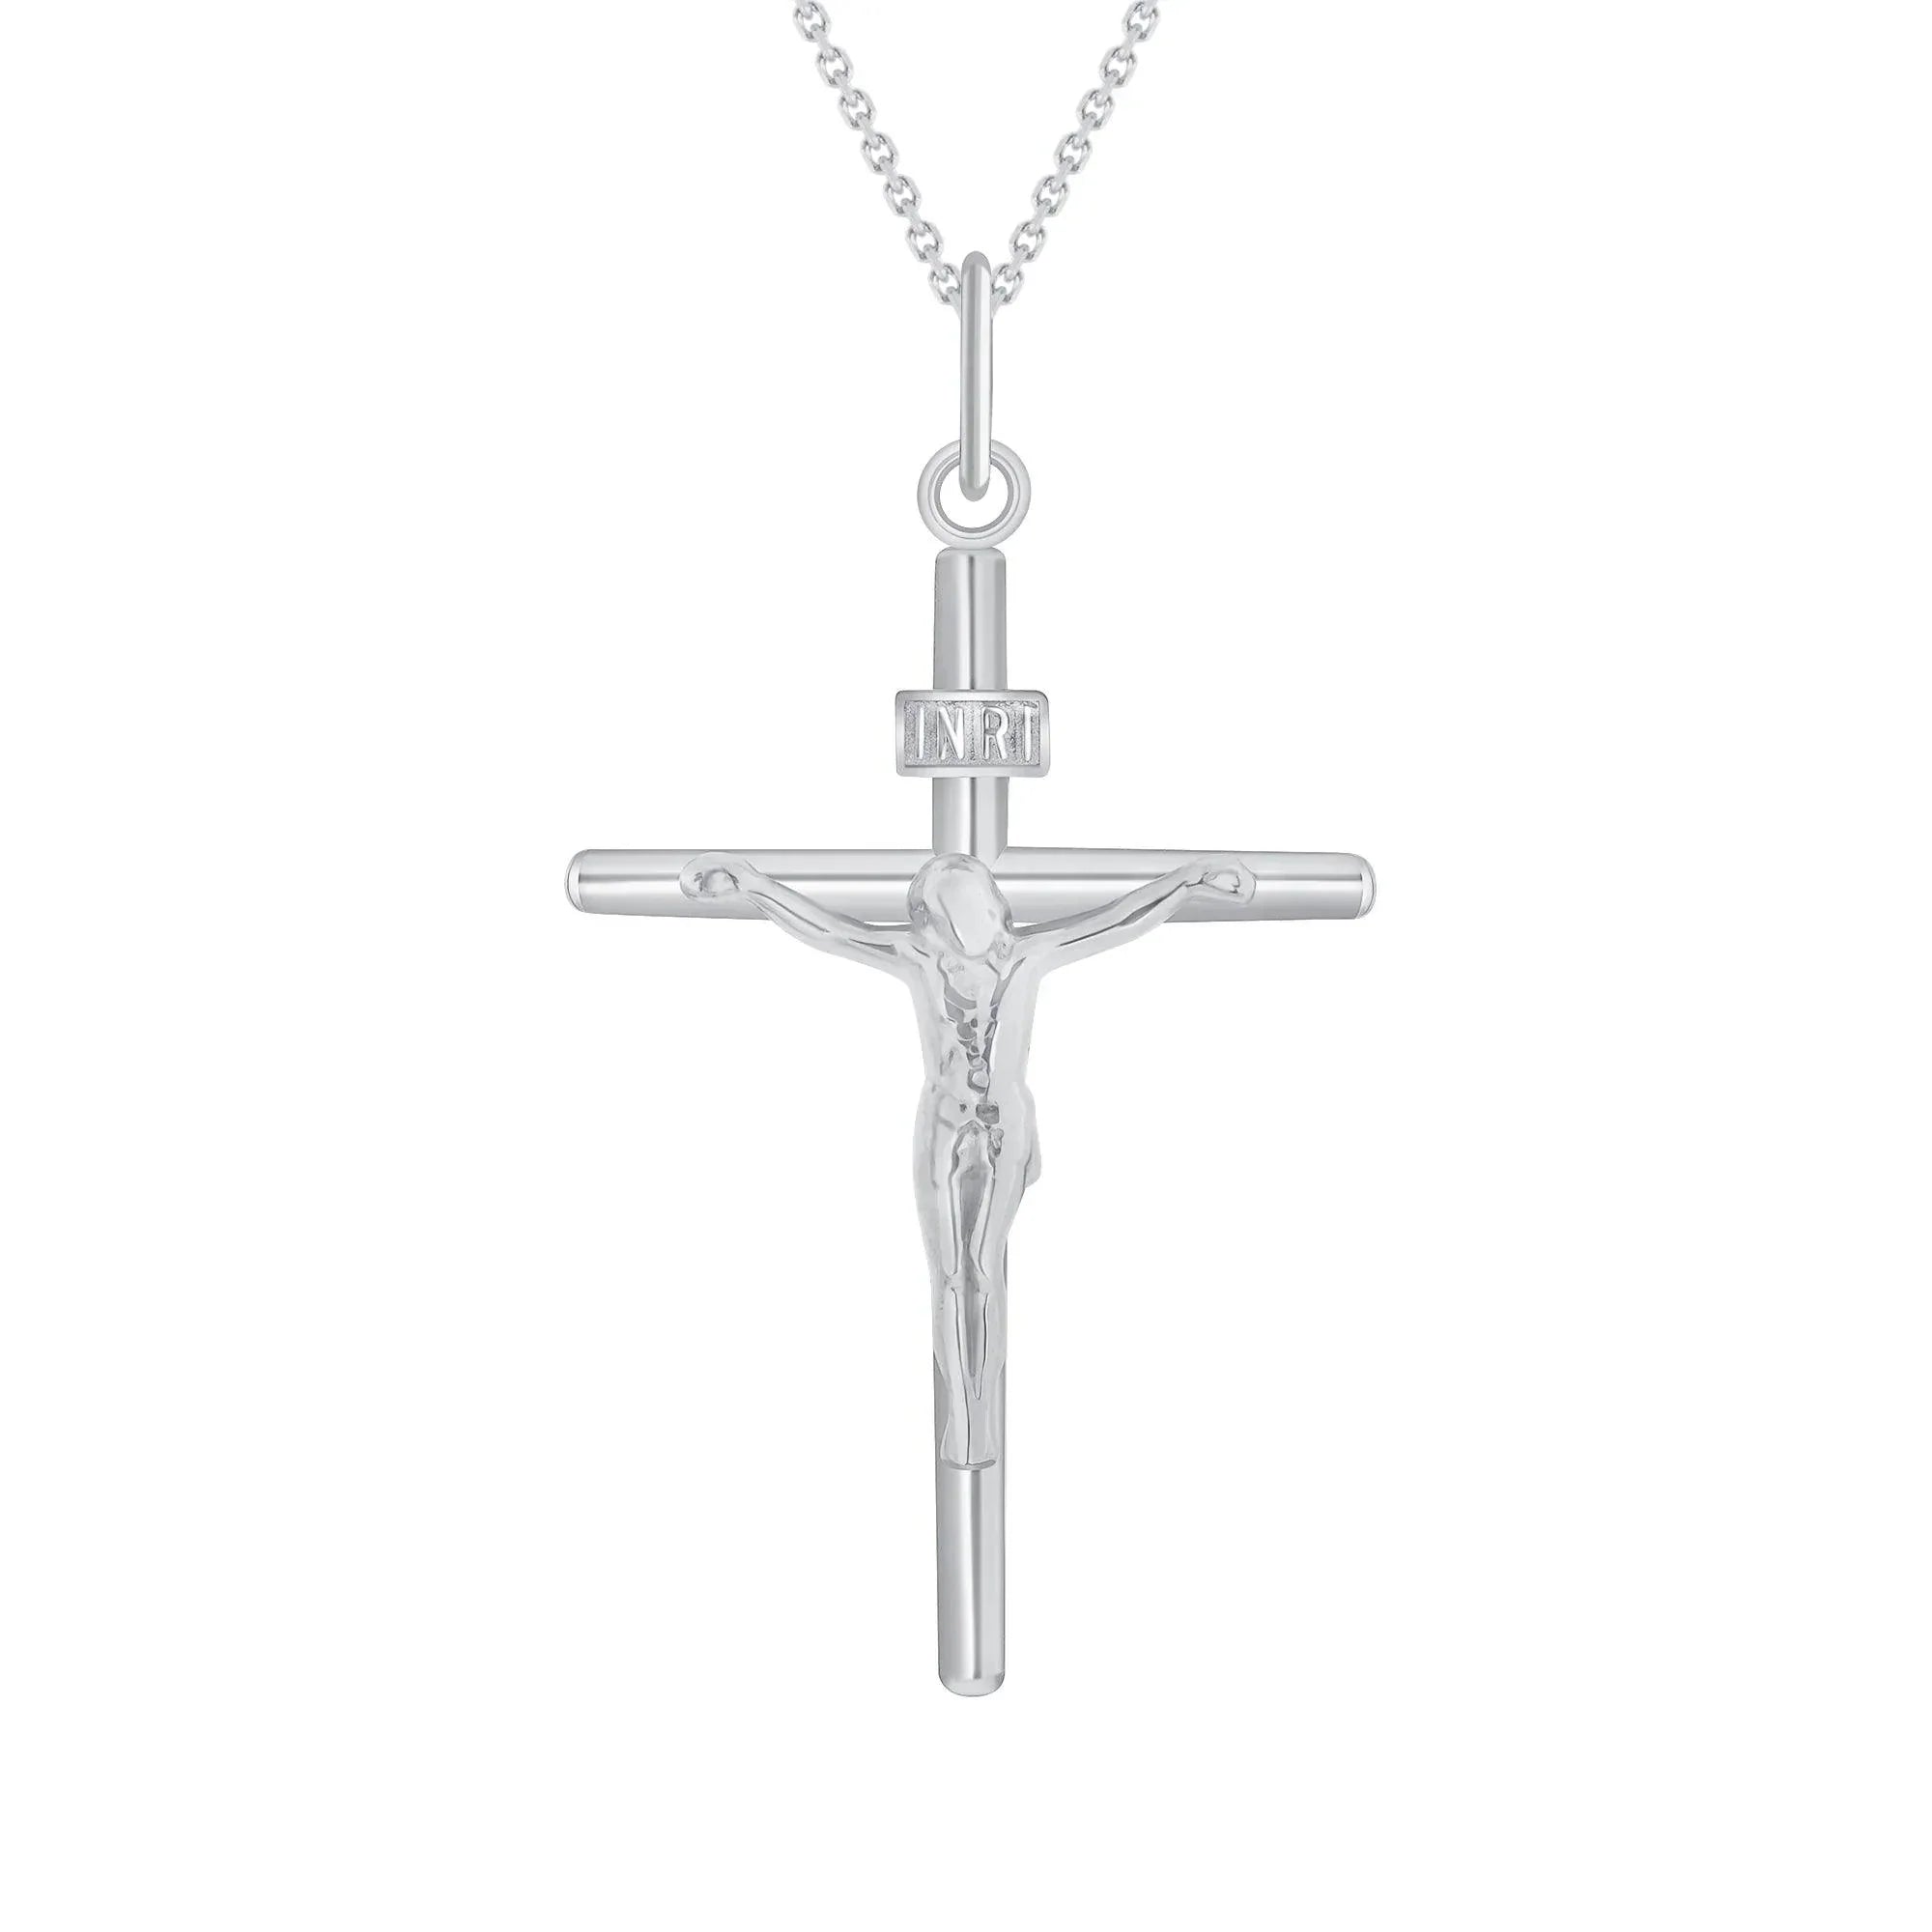 INRI Crucifix Pendant Necklace - A Symbol of Faith and Sacrifice from Rafi's Jewelry